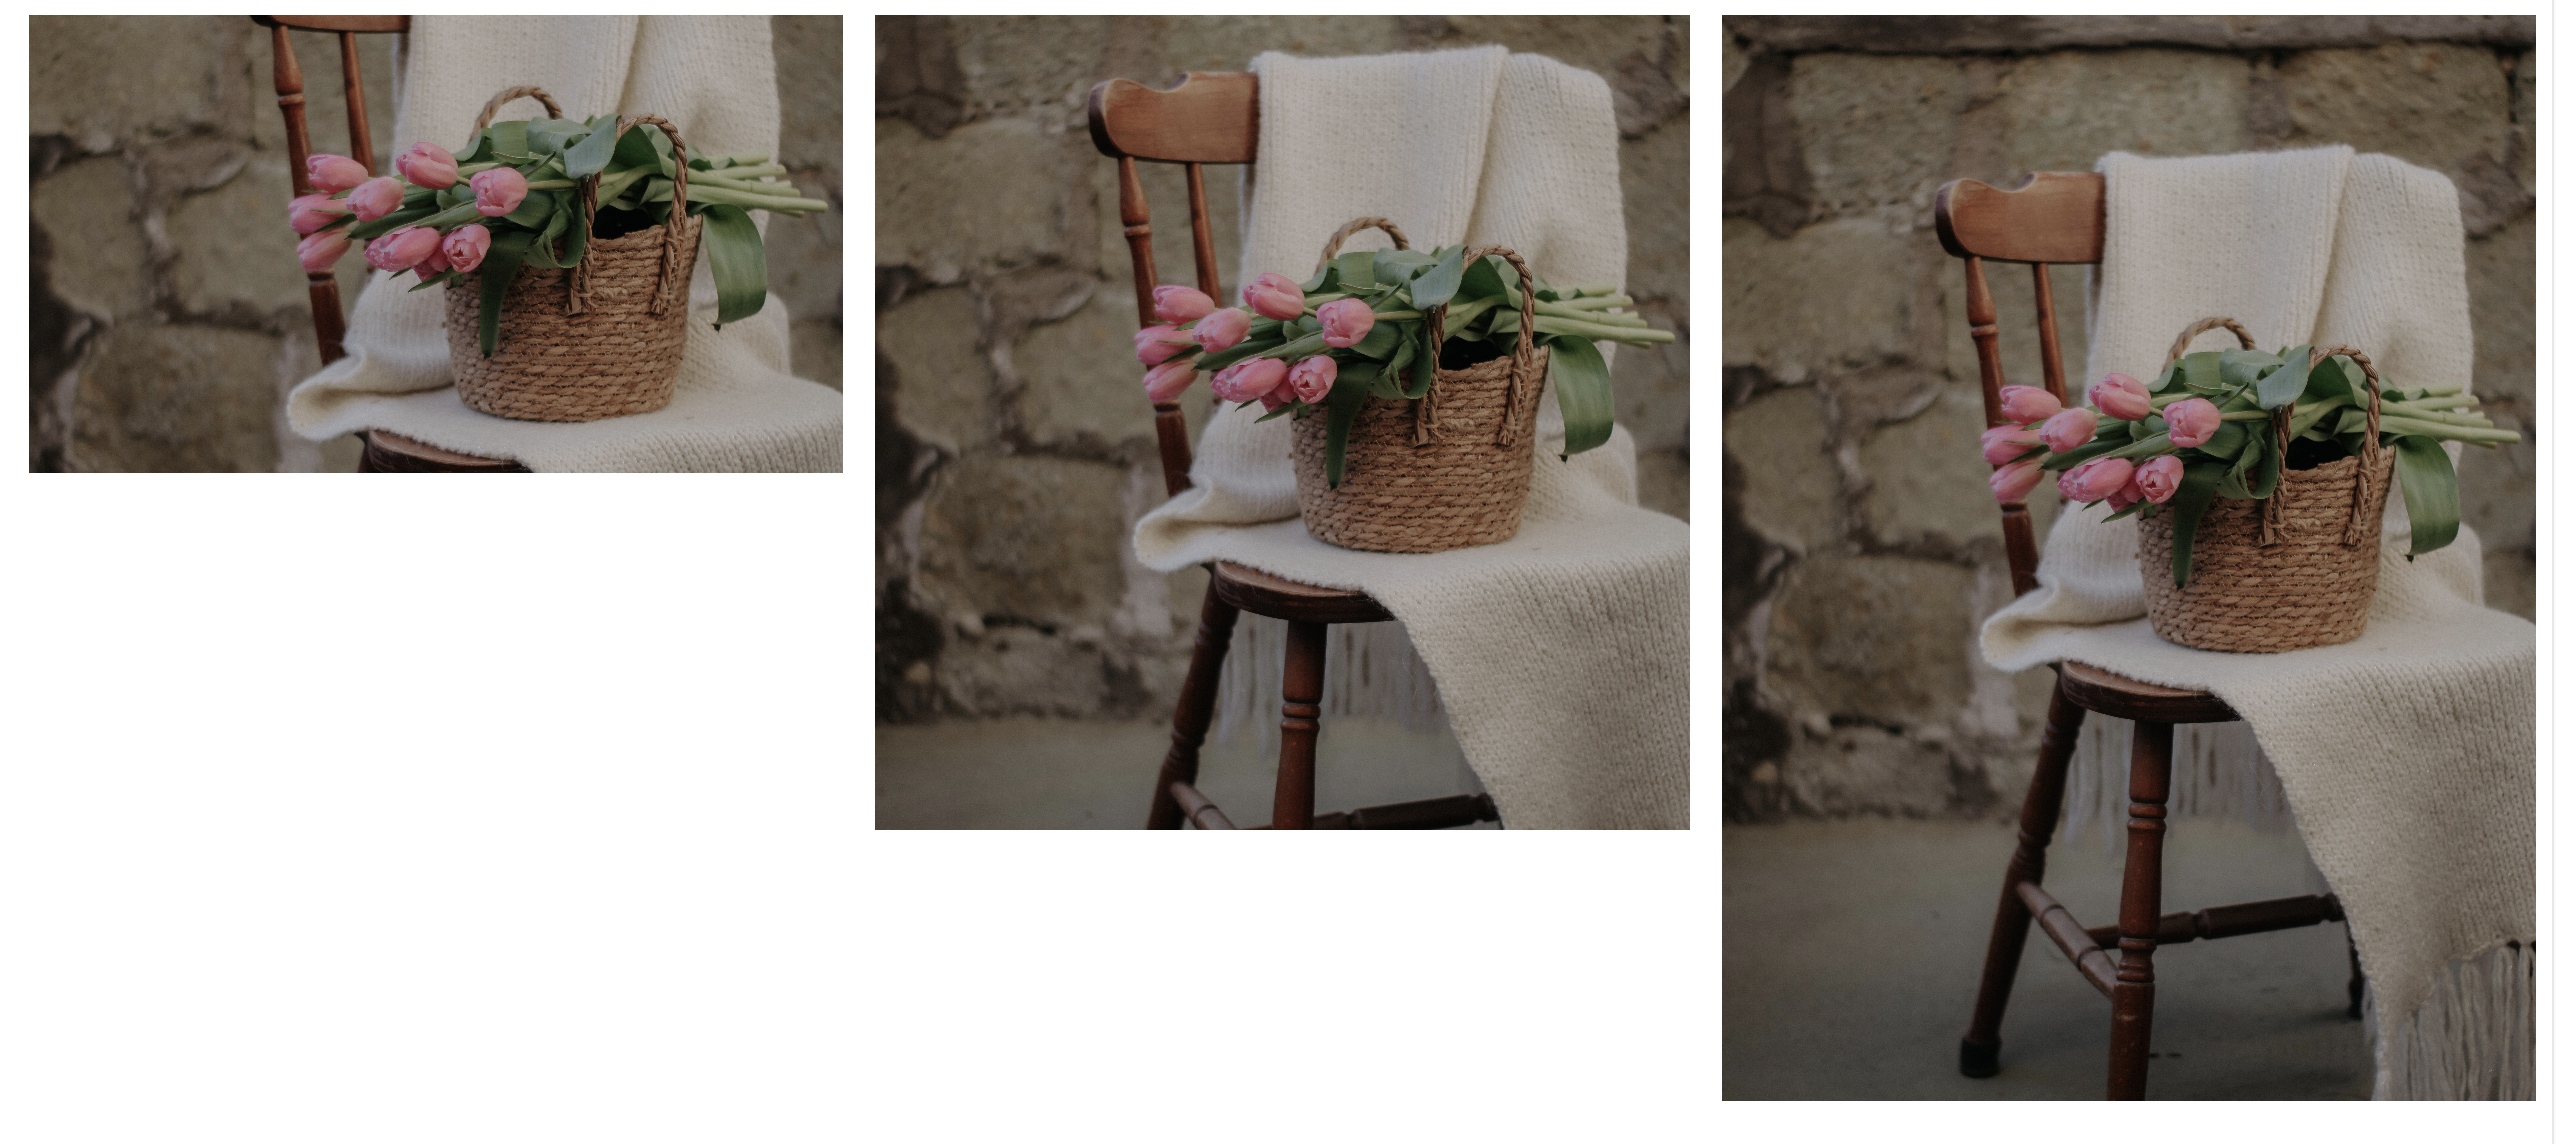 The three images now rendered perfectly, showing the subject matter flower bouquet centered in every arbitrary aspect ratio the image is displayed at.